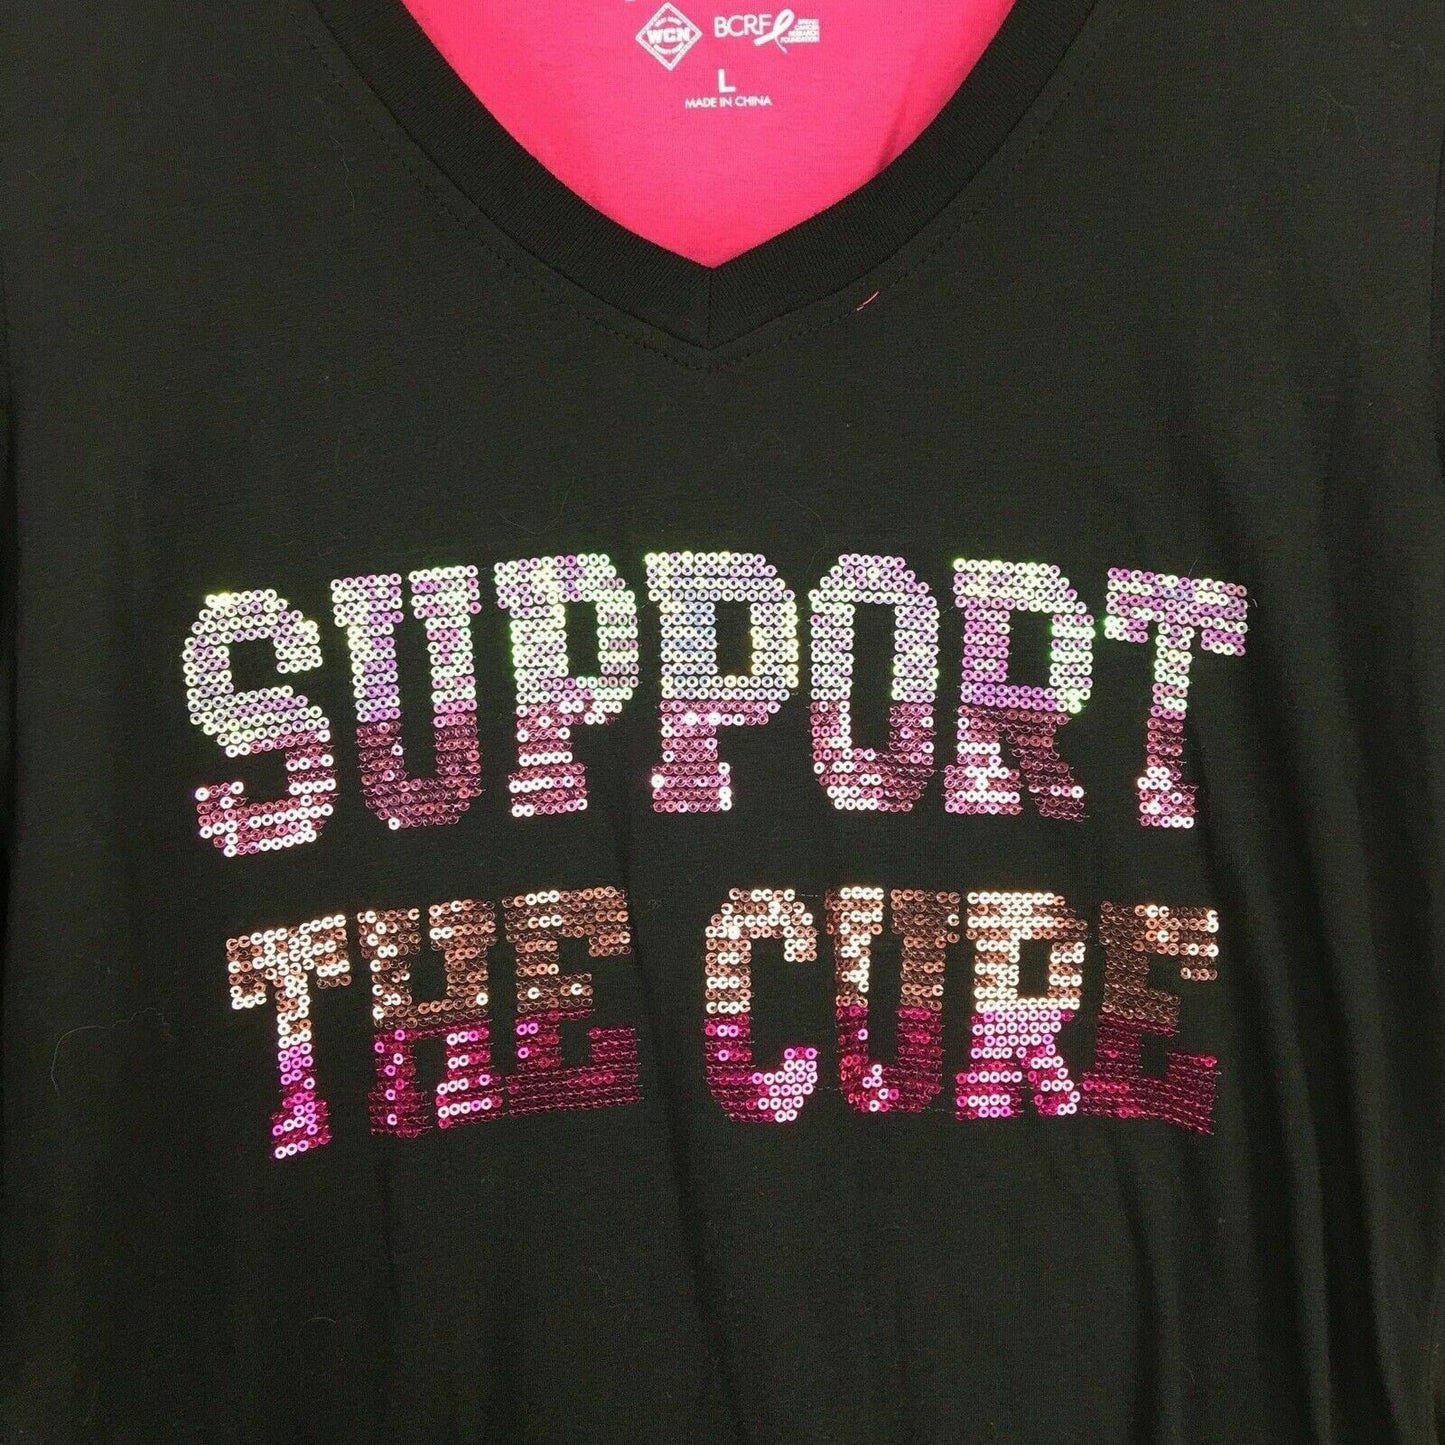 Breast Cancer Awareness Womens Size L Black V-Neck T-Shirt “Support the Cure” Sequined L/s